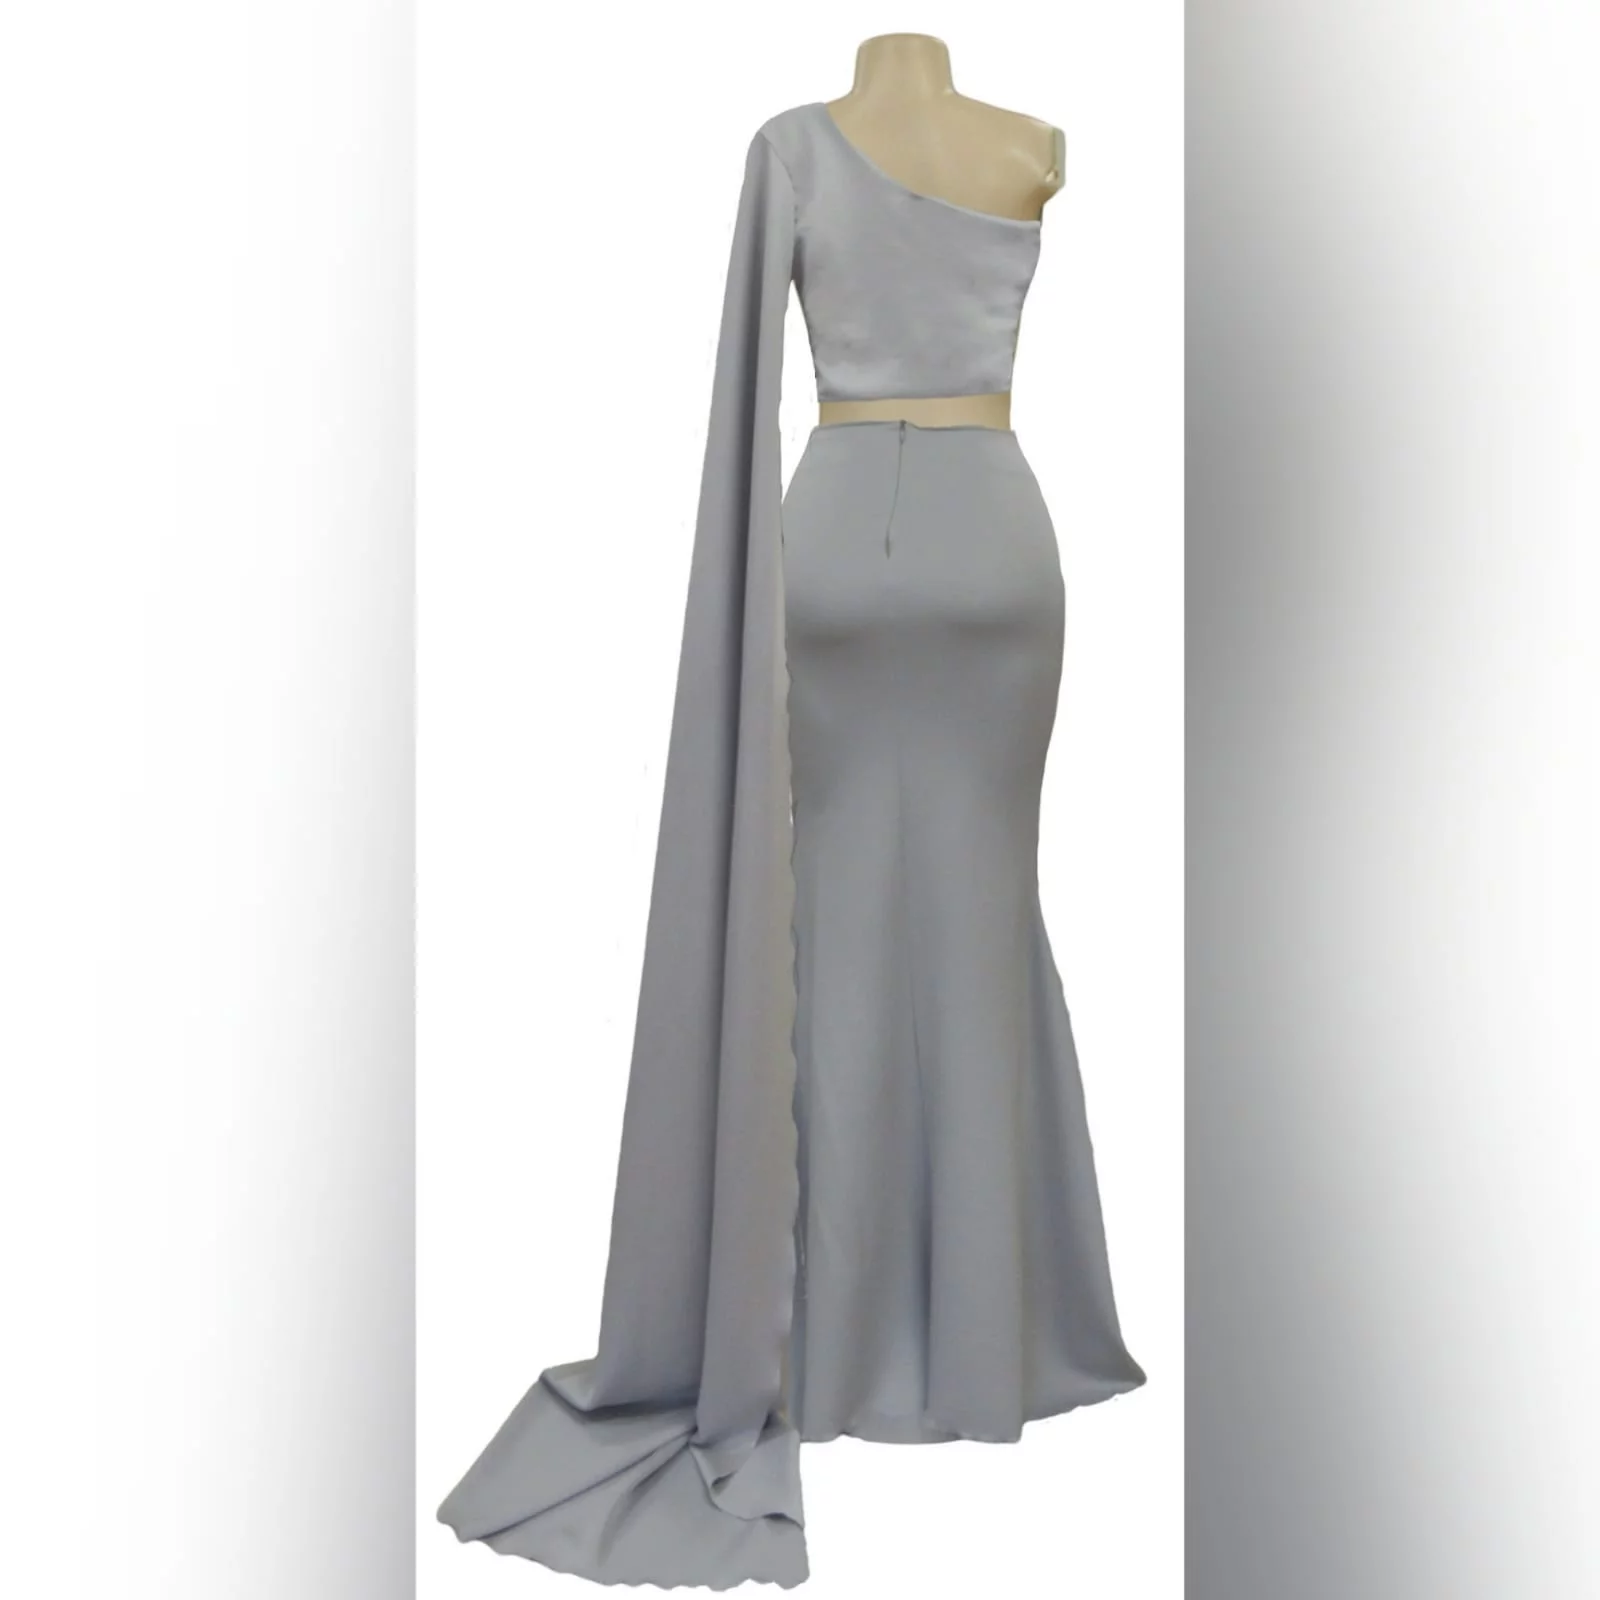 2 piece light grey matric dance dress 5 2 piece light grey matric dance dress, crop top with a single shoulder and a long wide sleeve creating a train. With a fitted long skirt, with a high slit.